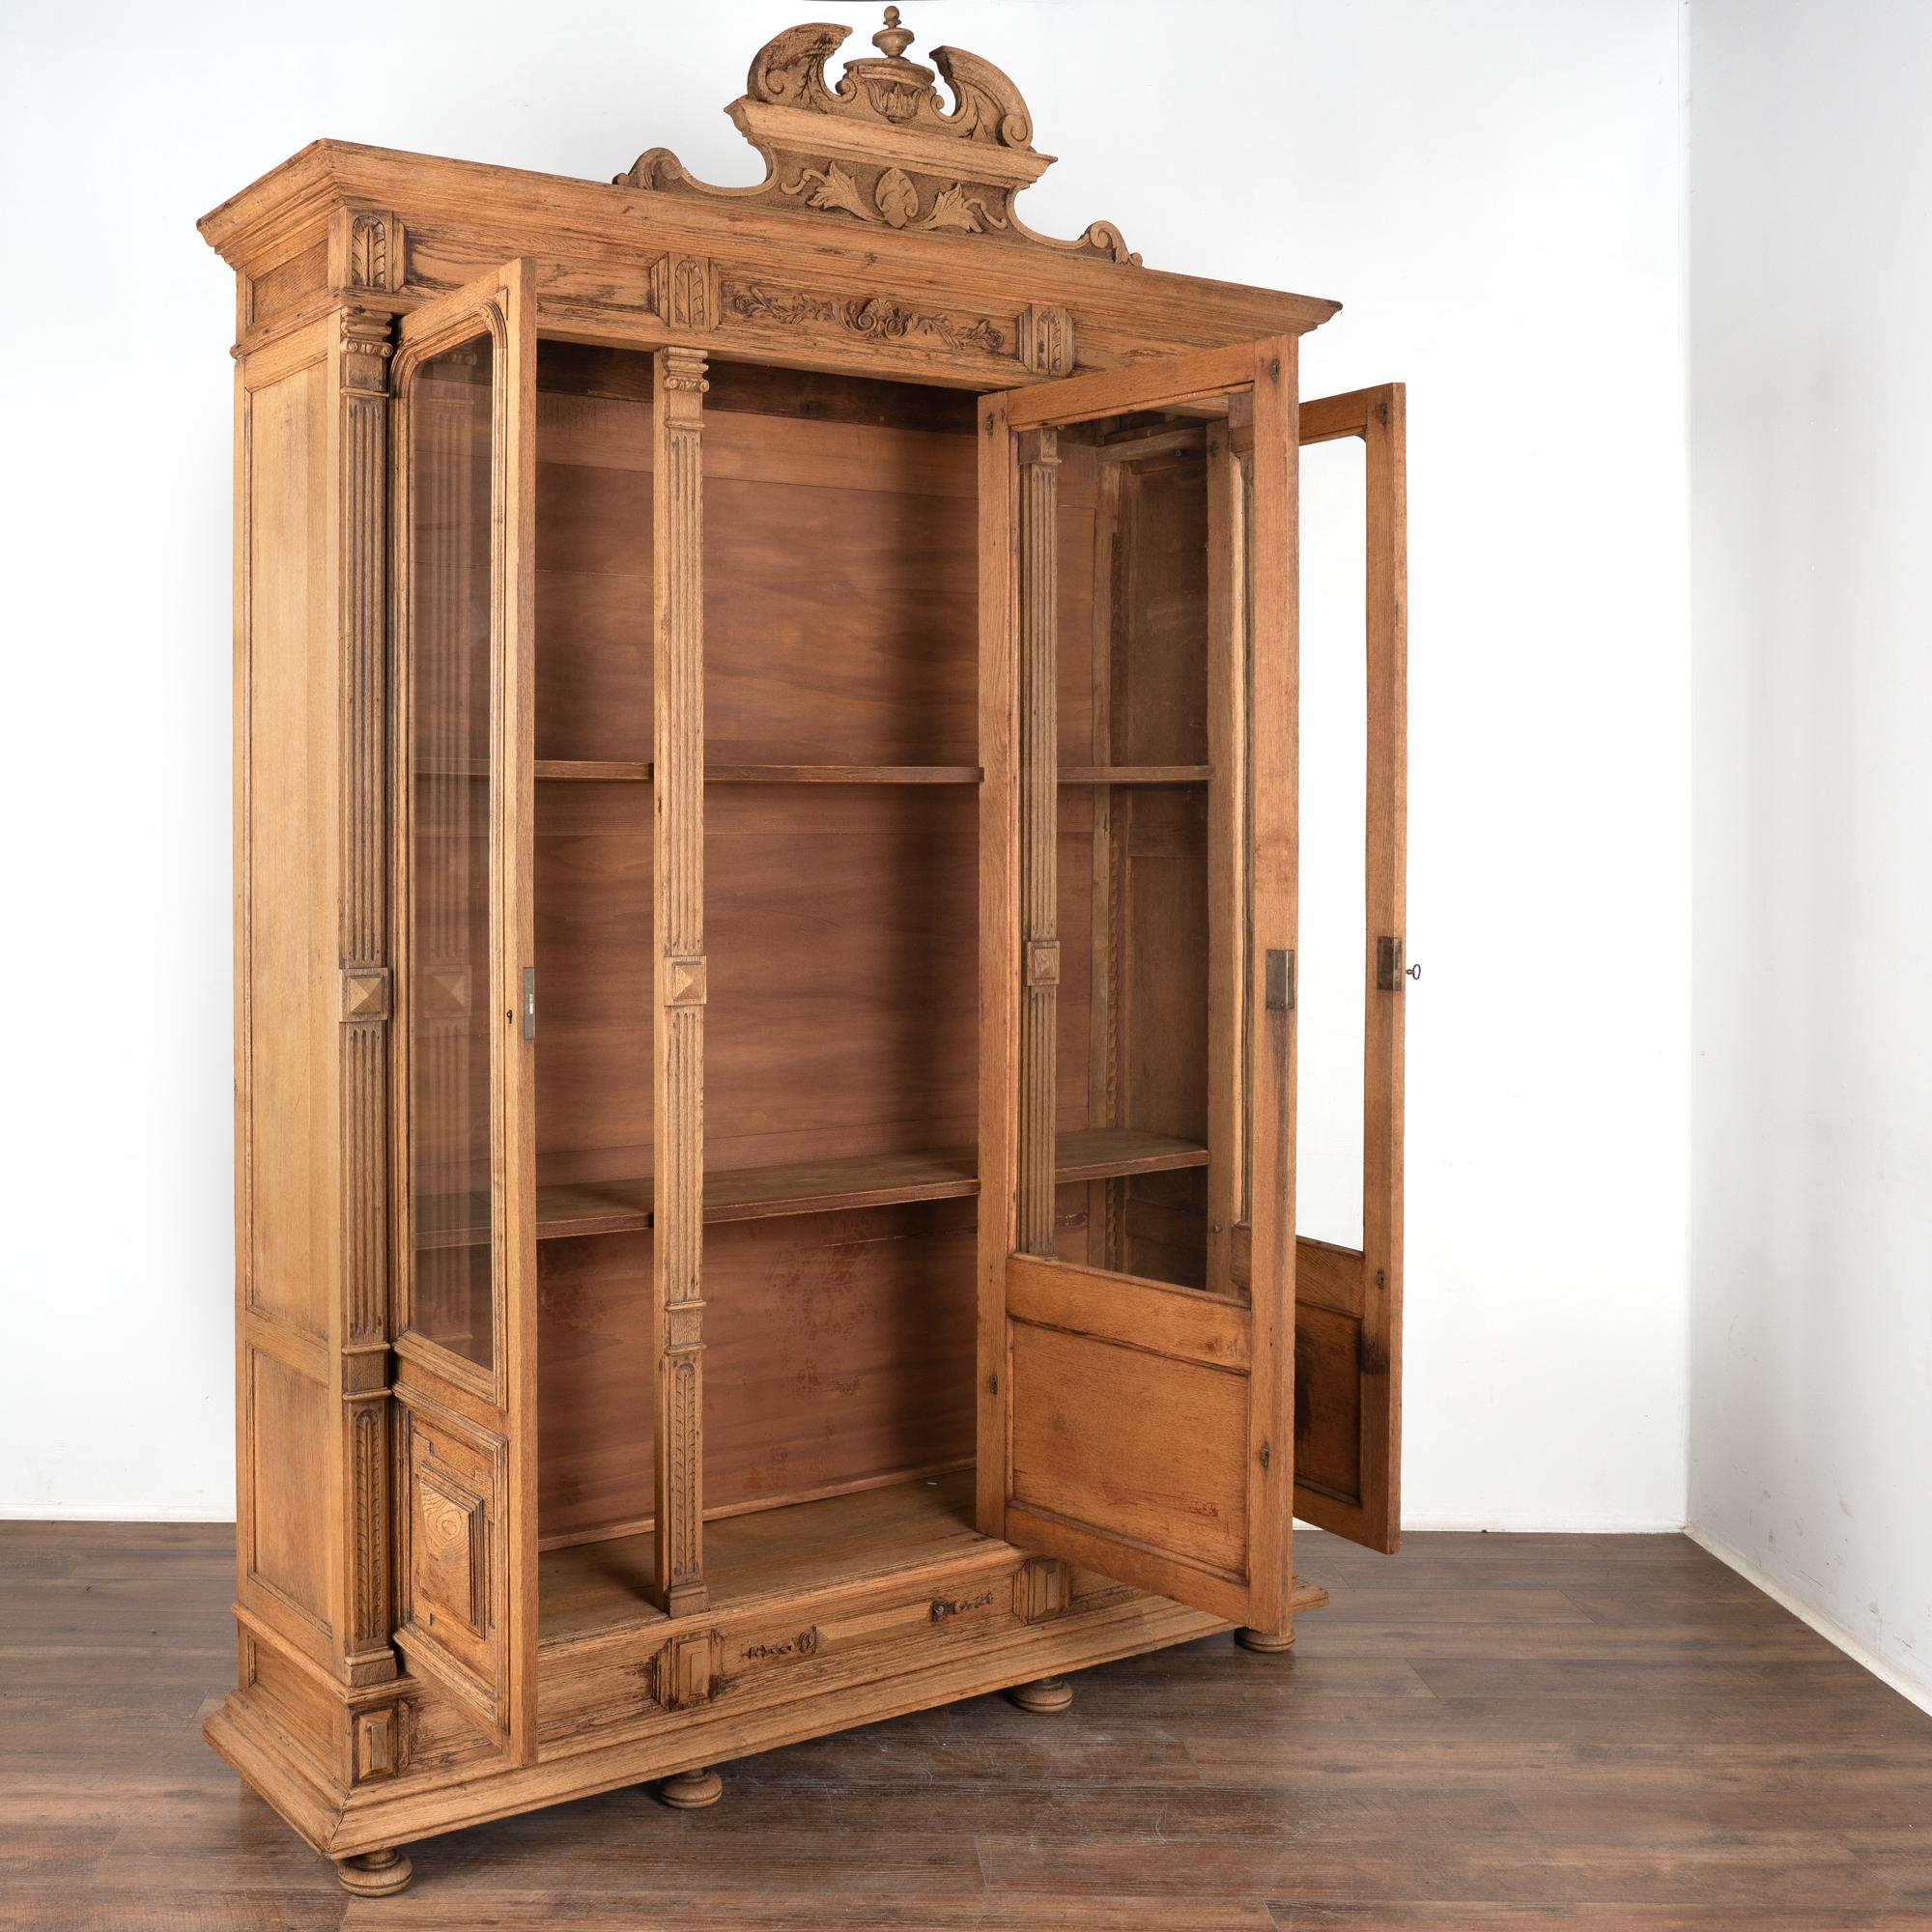 Country Bleached Oak Display Cabinet Bookcase With Adjustable Shelves France circa 1900s